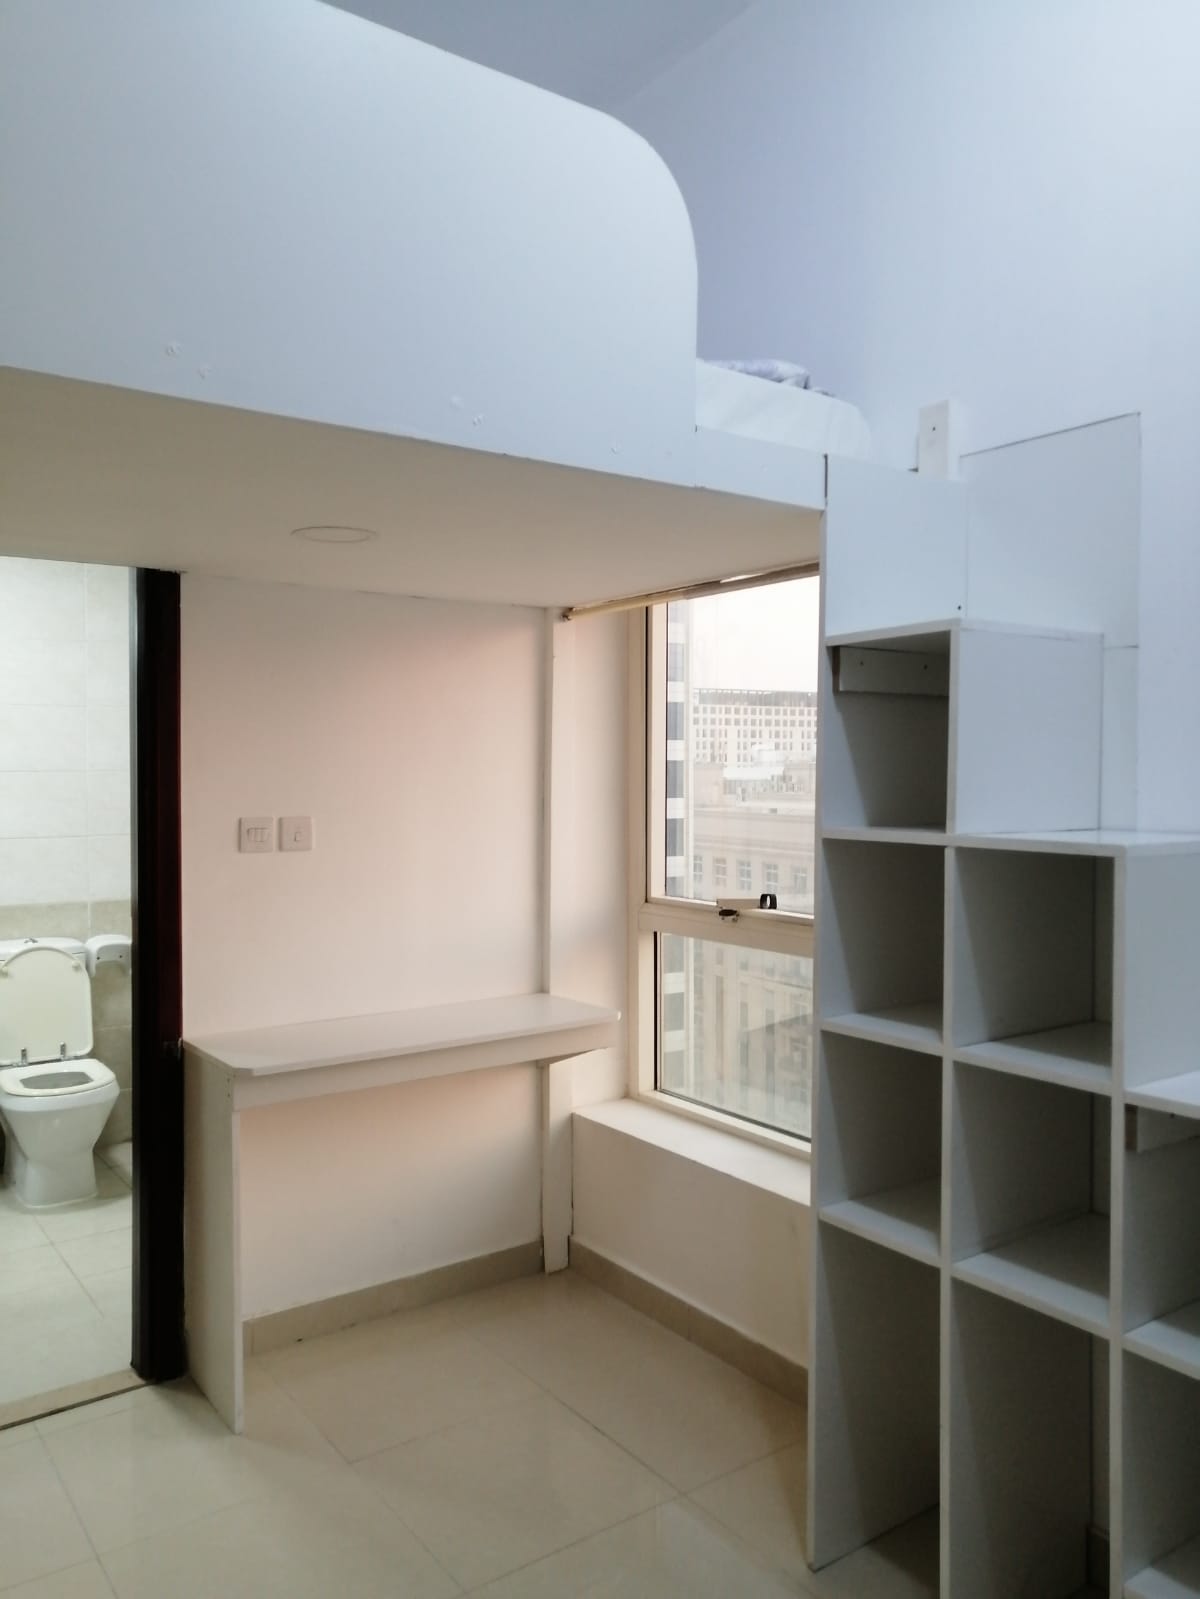 Loft Type Partition Room With Big Window And Attached Bathroom With Bathtub